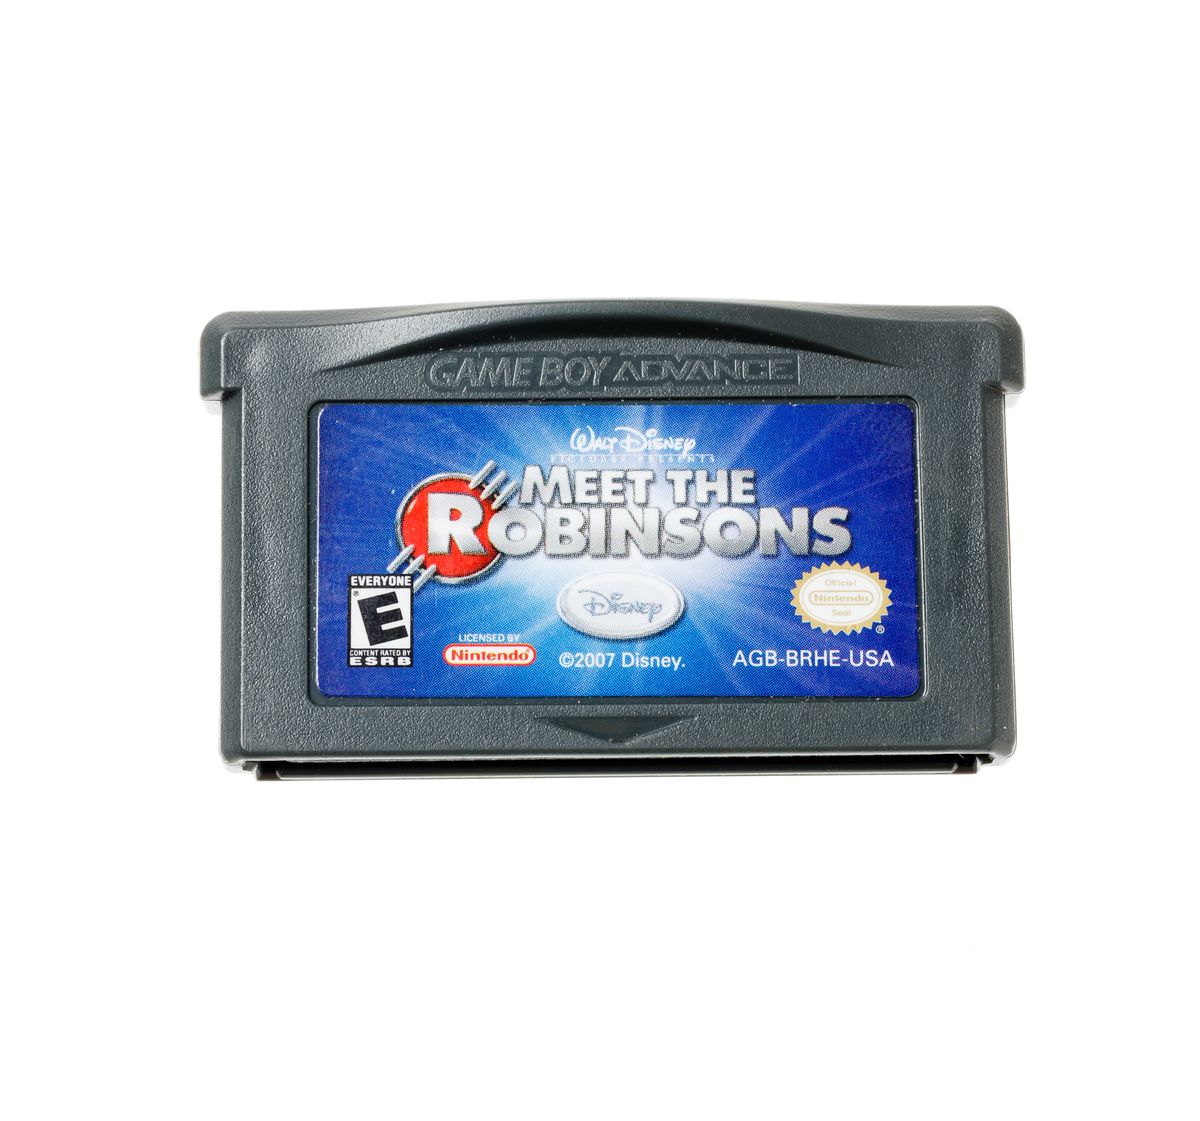 Meet the Robinsons - Gameboy Advance Games